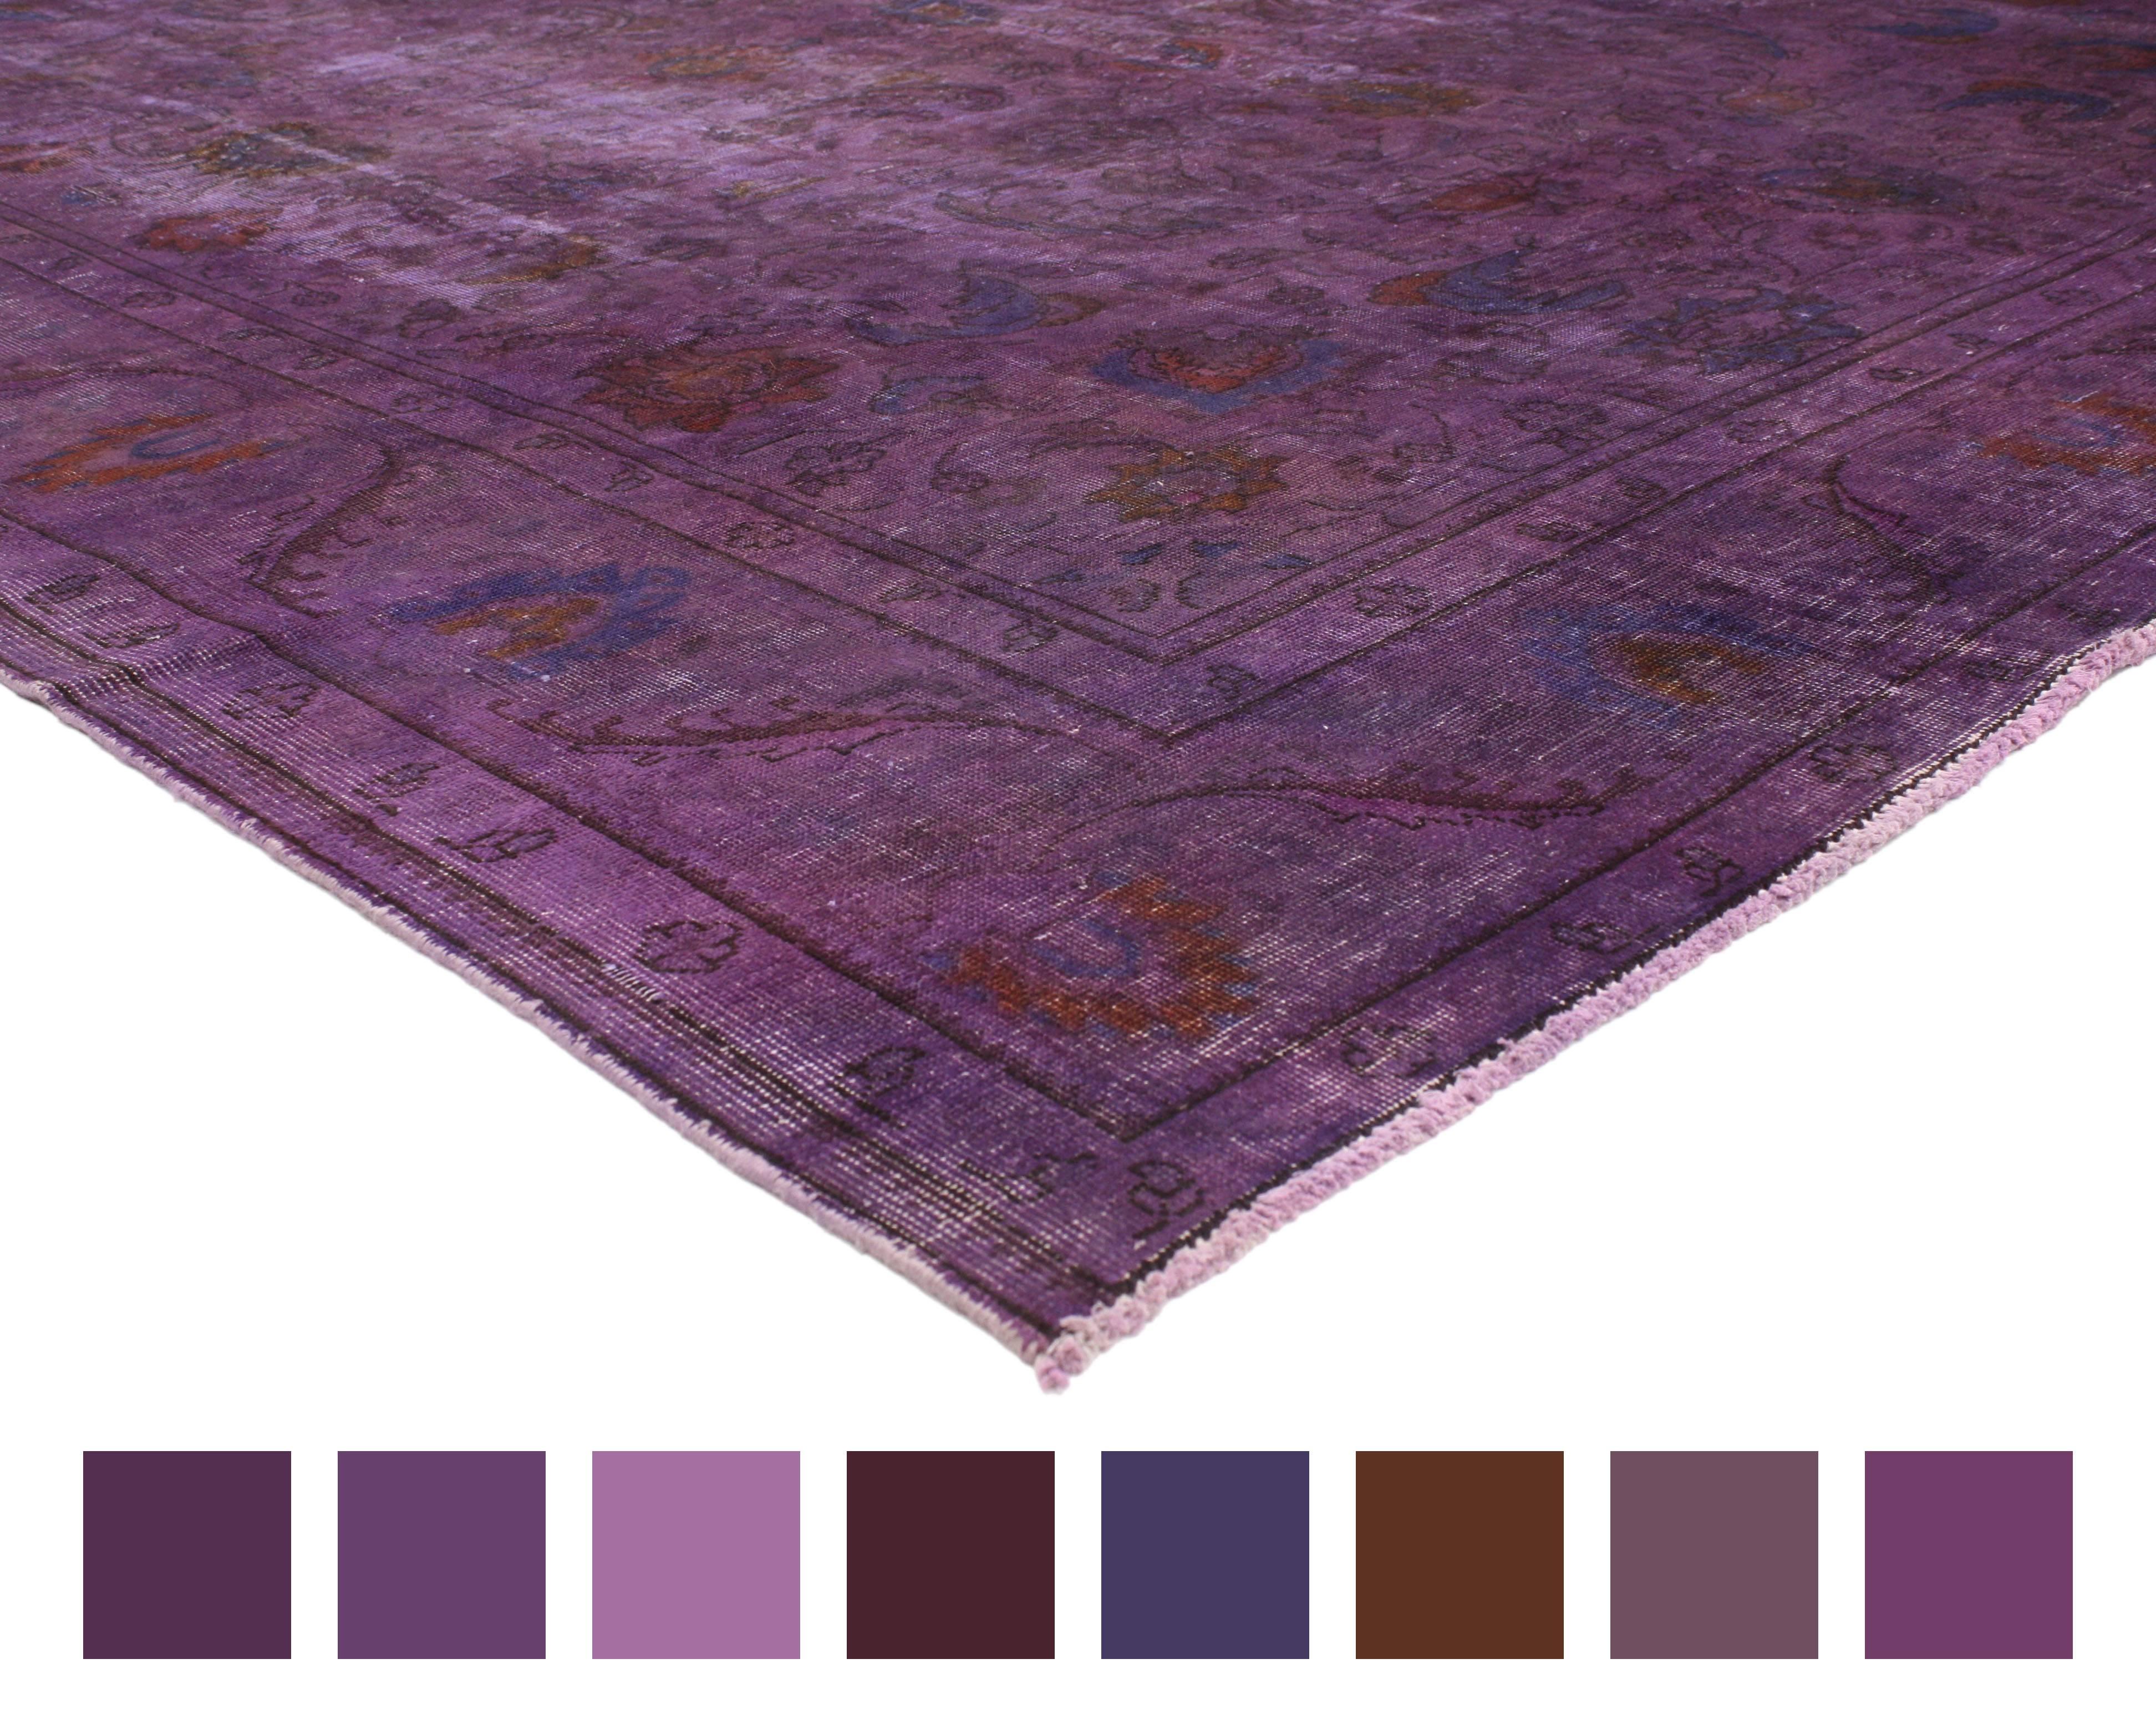 This beautifully composed distressed overdyed violet purple Persian rug with postmodern Memphis style features an allover geometric floral pattern. Saturated with variegated shades of purple bring a fashion-forward presence when combined with its